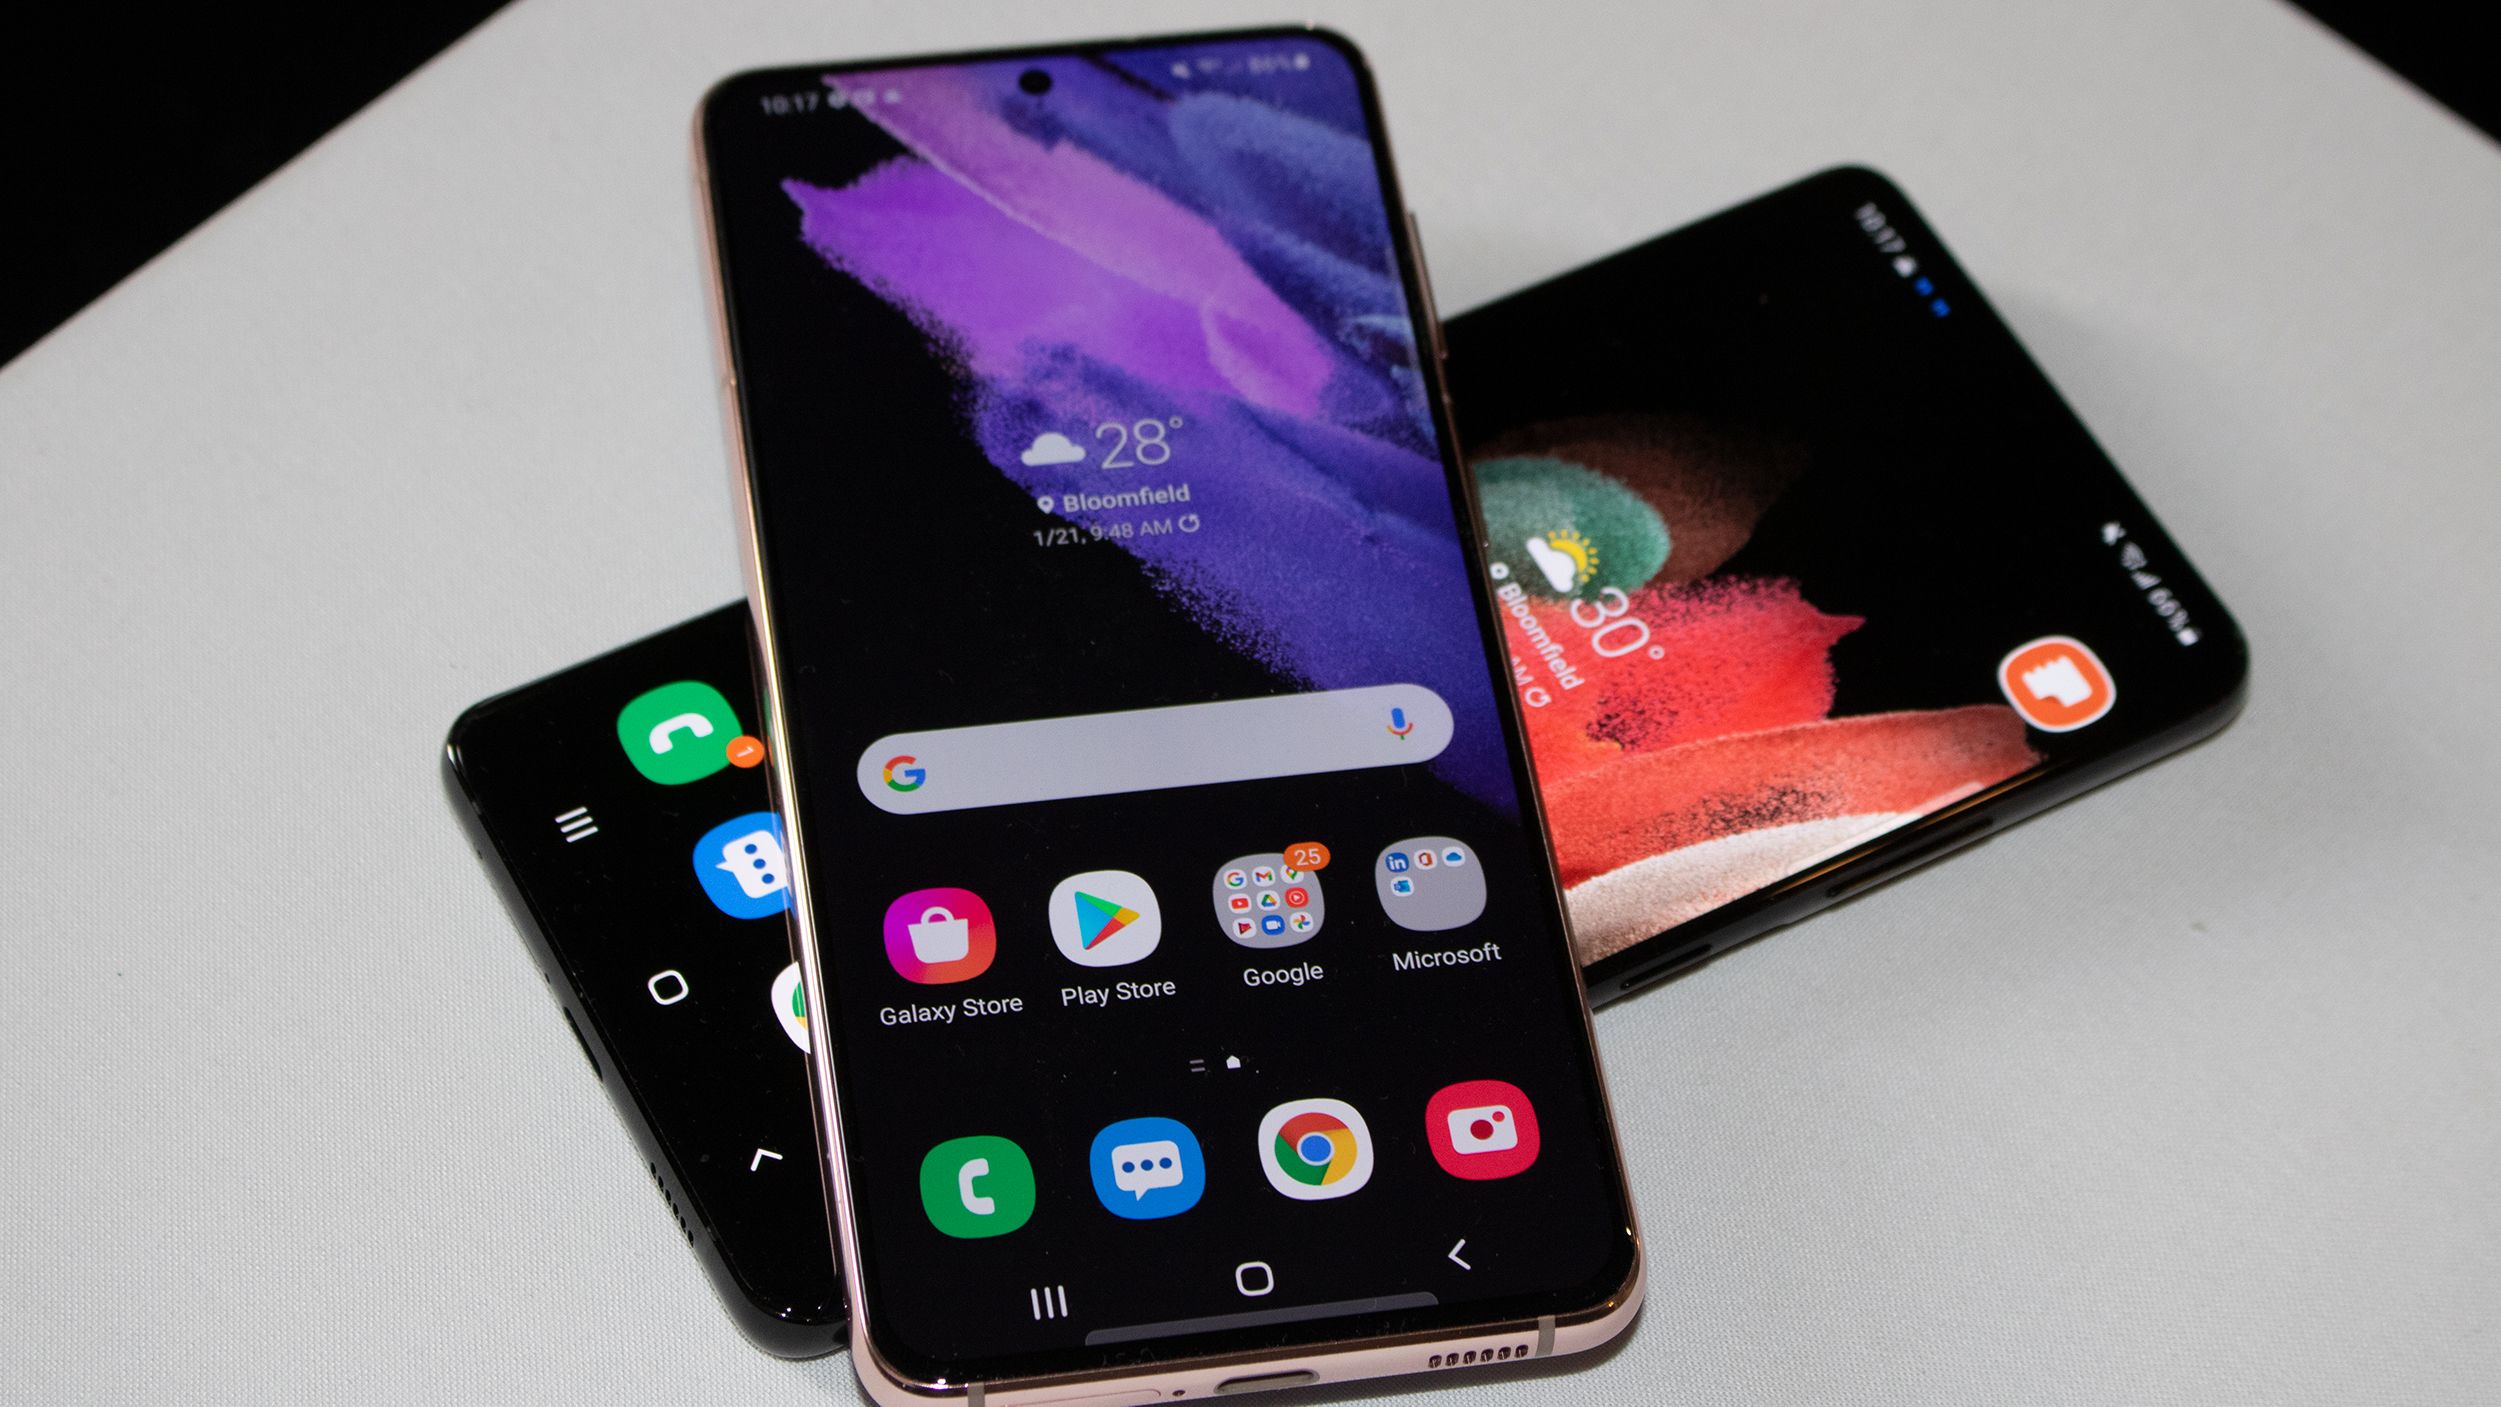 Samsung Galaxy S10 Review: A Truly Elite, Premium Smartphone